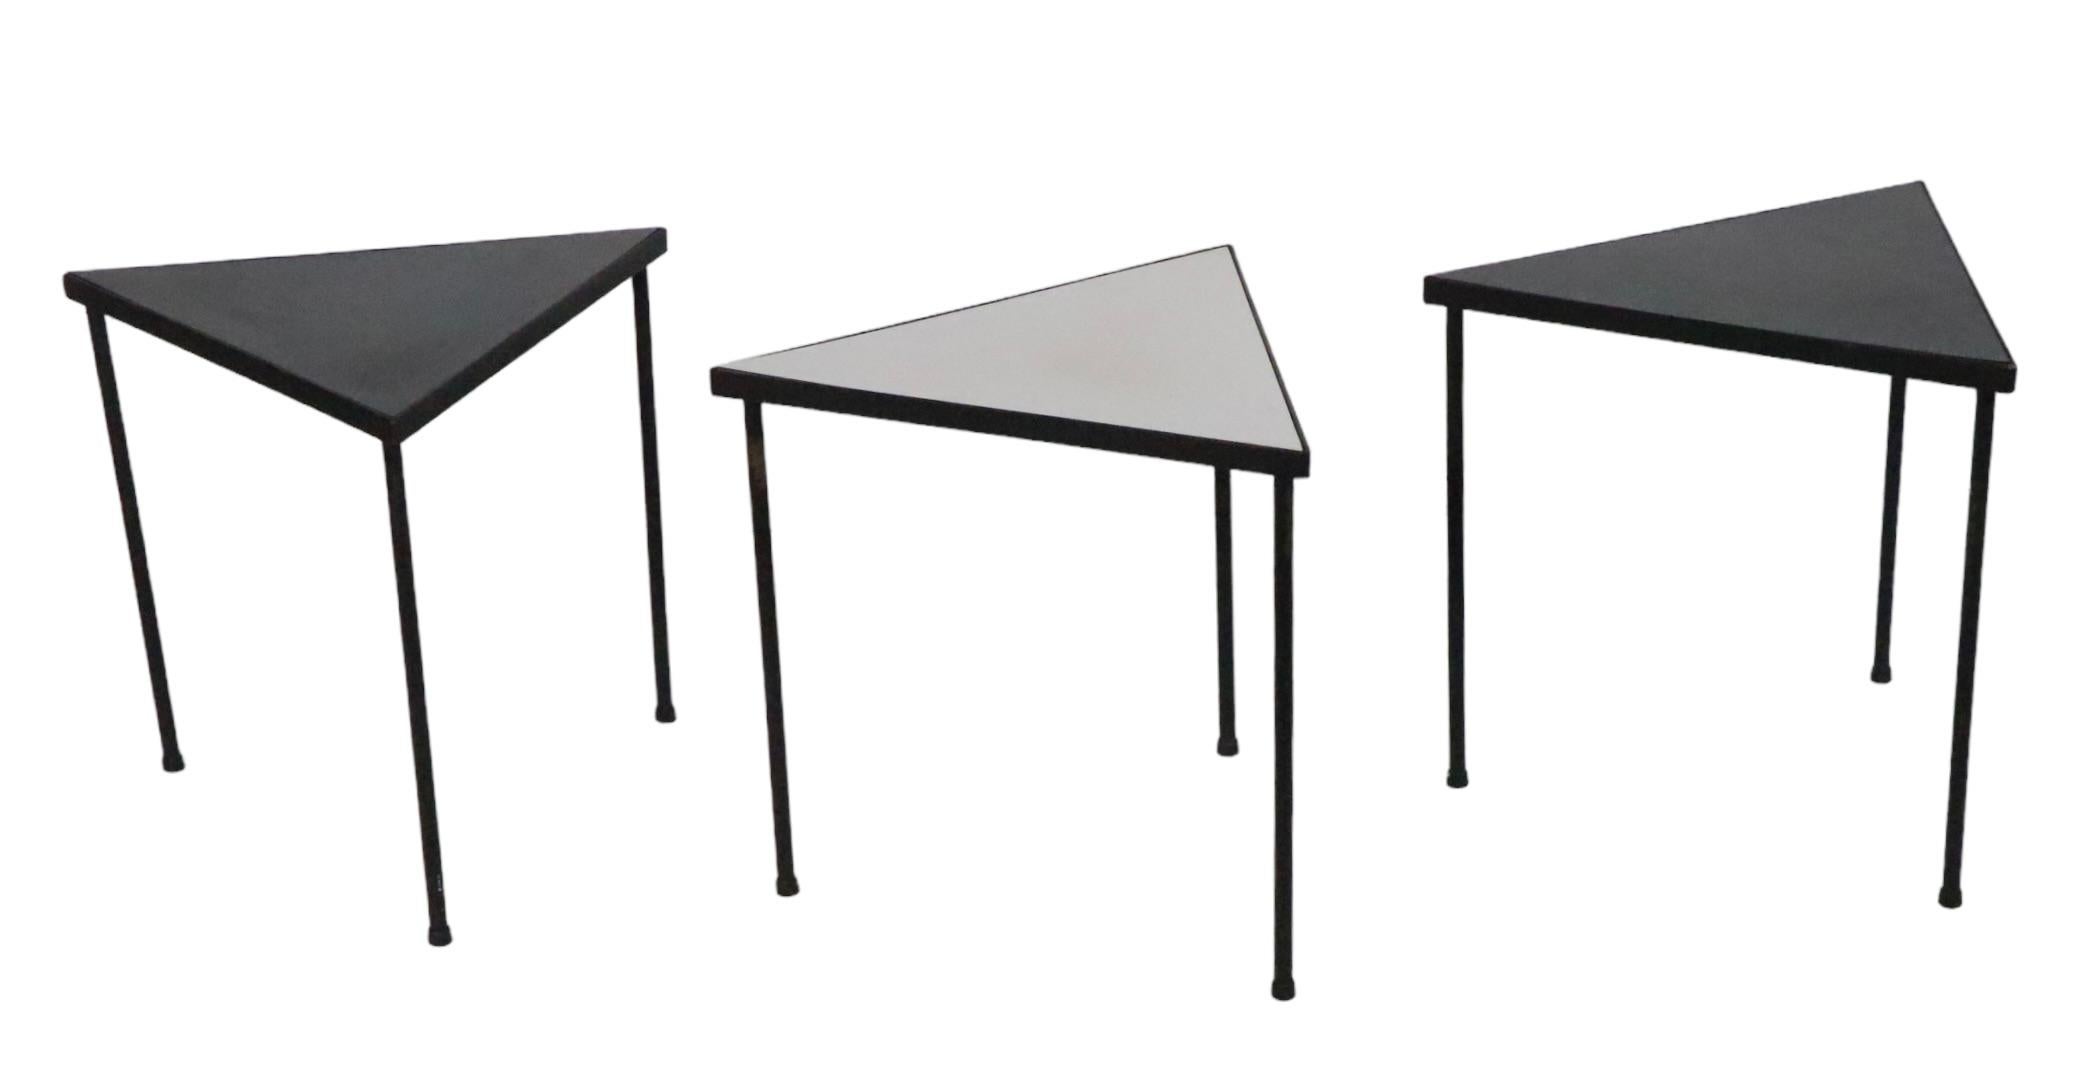  Set of 3 Mid Century Triangular  Stacking Tables by Frederic  Weinberg c 1950's For Sale 7